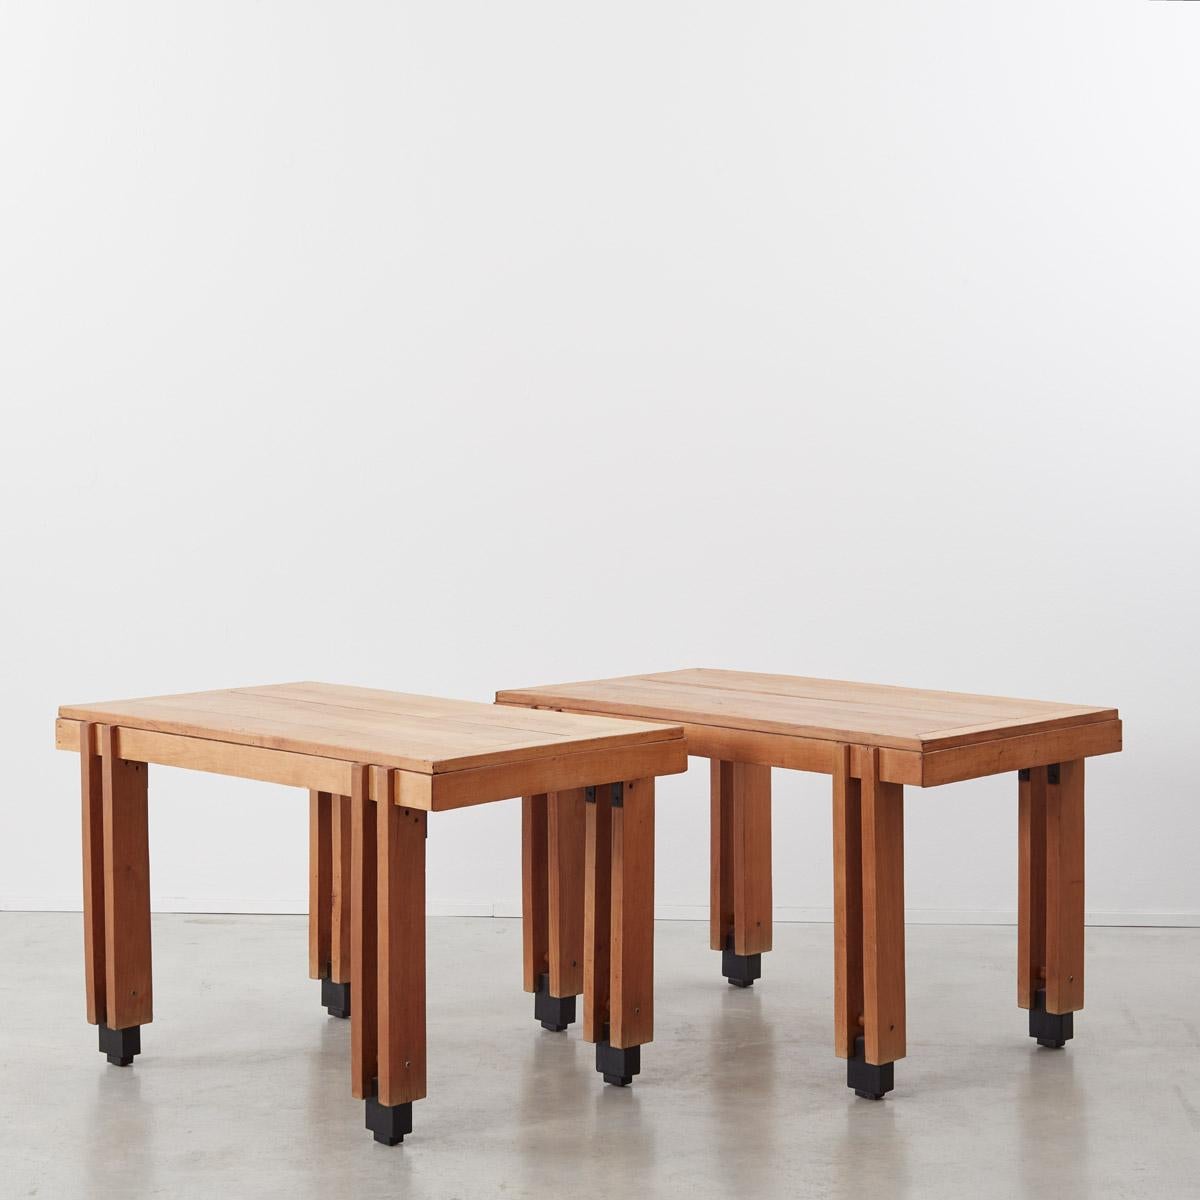 These charming tables – for use as desks or dining – are made from solid wood have a lovely handmade quality to them. They are unmarked and possibly prototypes, with a design aesthetic alluding to the works of renowned Italian architect Carlo Scarpa